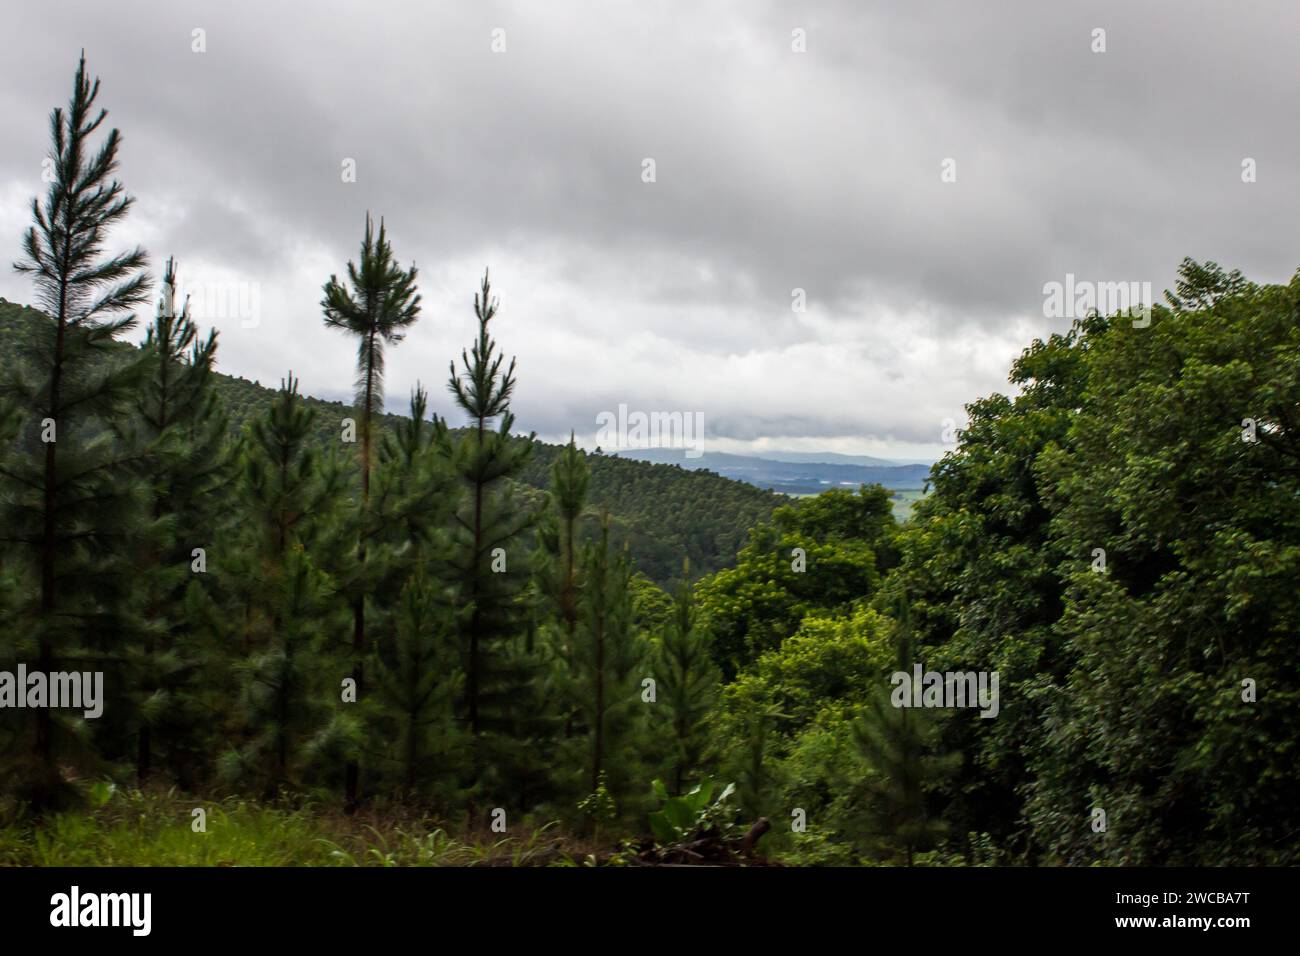 The tops of pine trees from a plantation with the forested slopes of Magoebaskloof, South Africa, in the background on an overcast and stormy day. Stock Photo